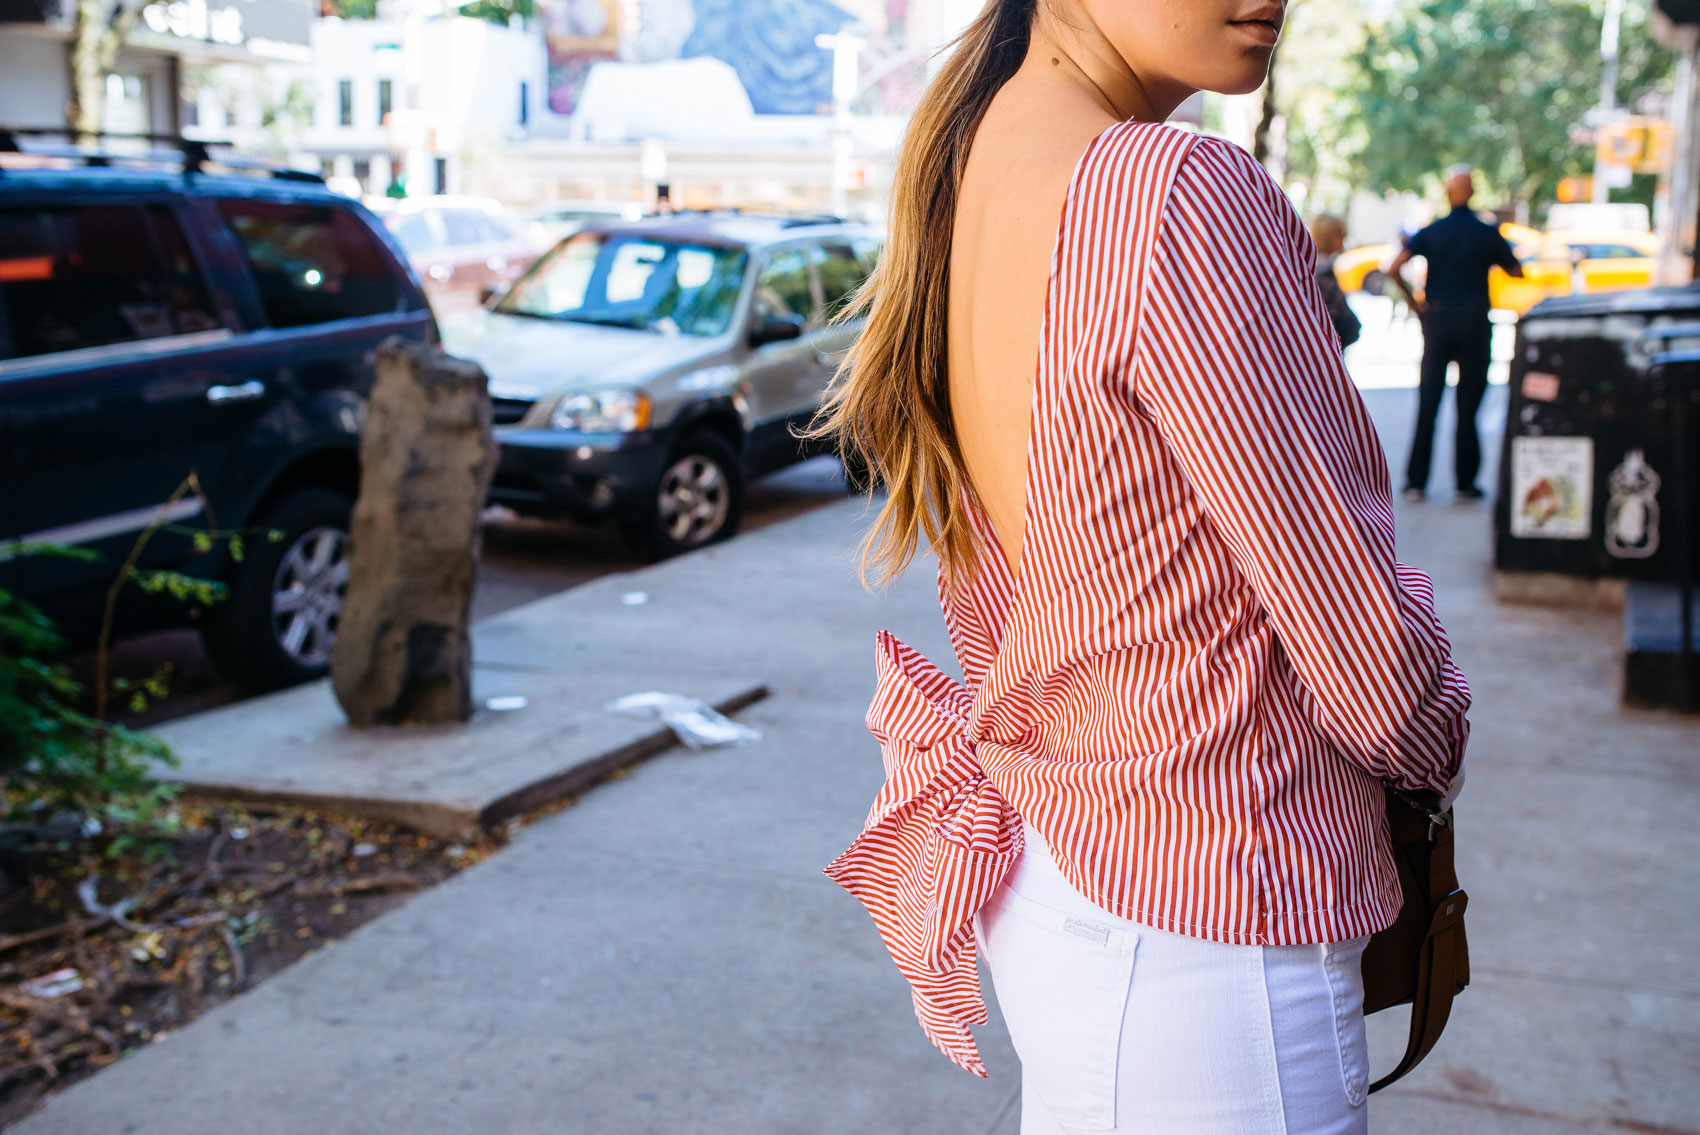 Maristella wears a red striped blouse with an open plunging back while in New York